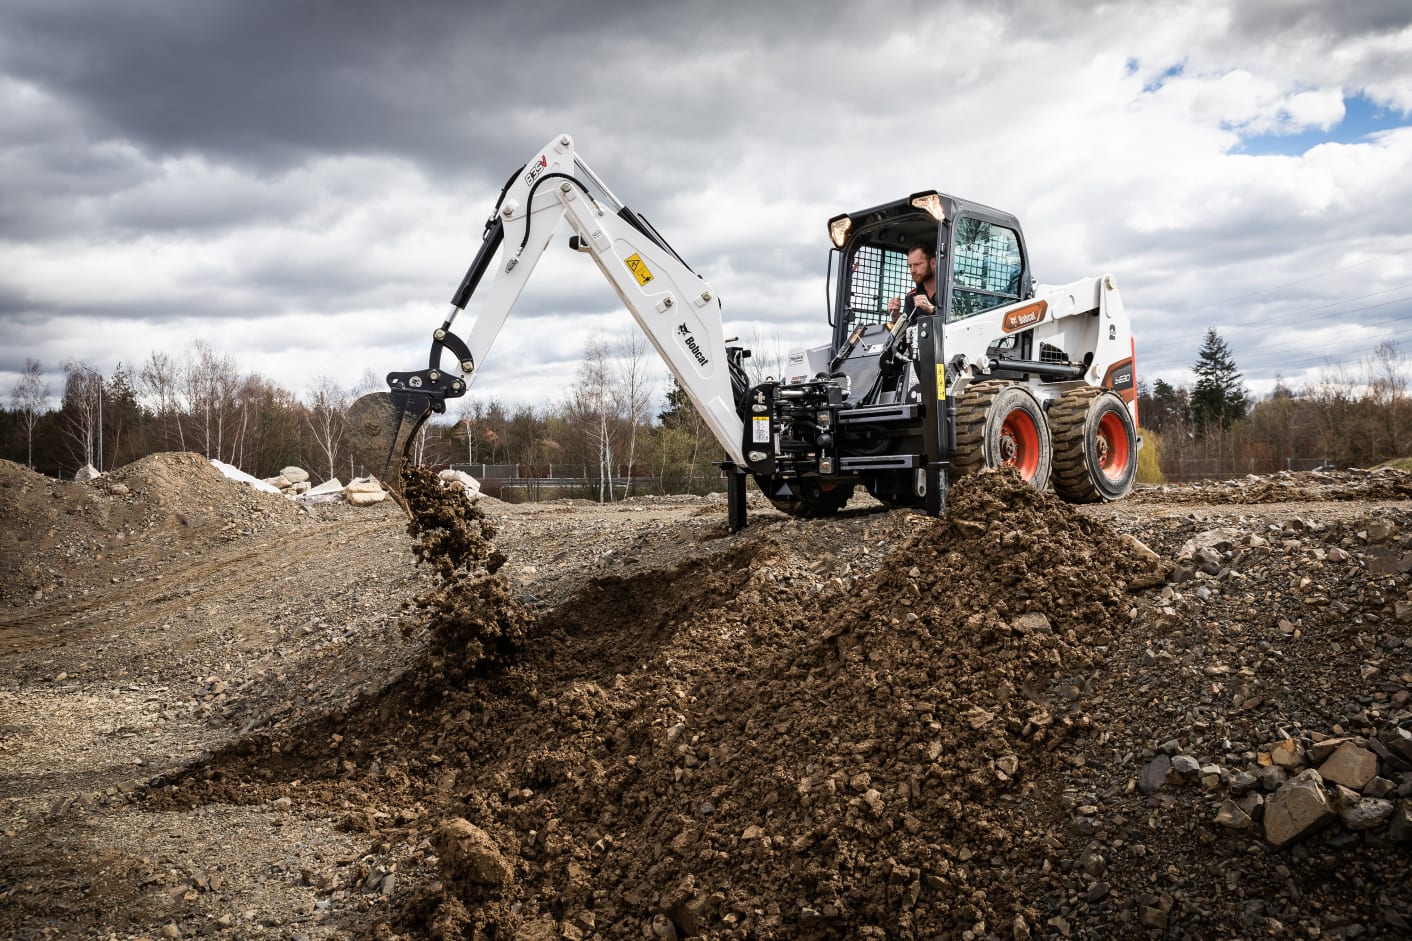 Browse Specs and more for the Bobcat S630 Skid-Steer Loader - White Star Machinery